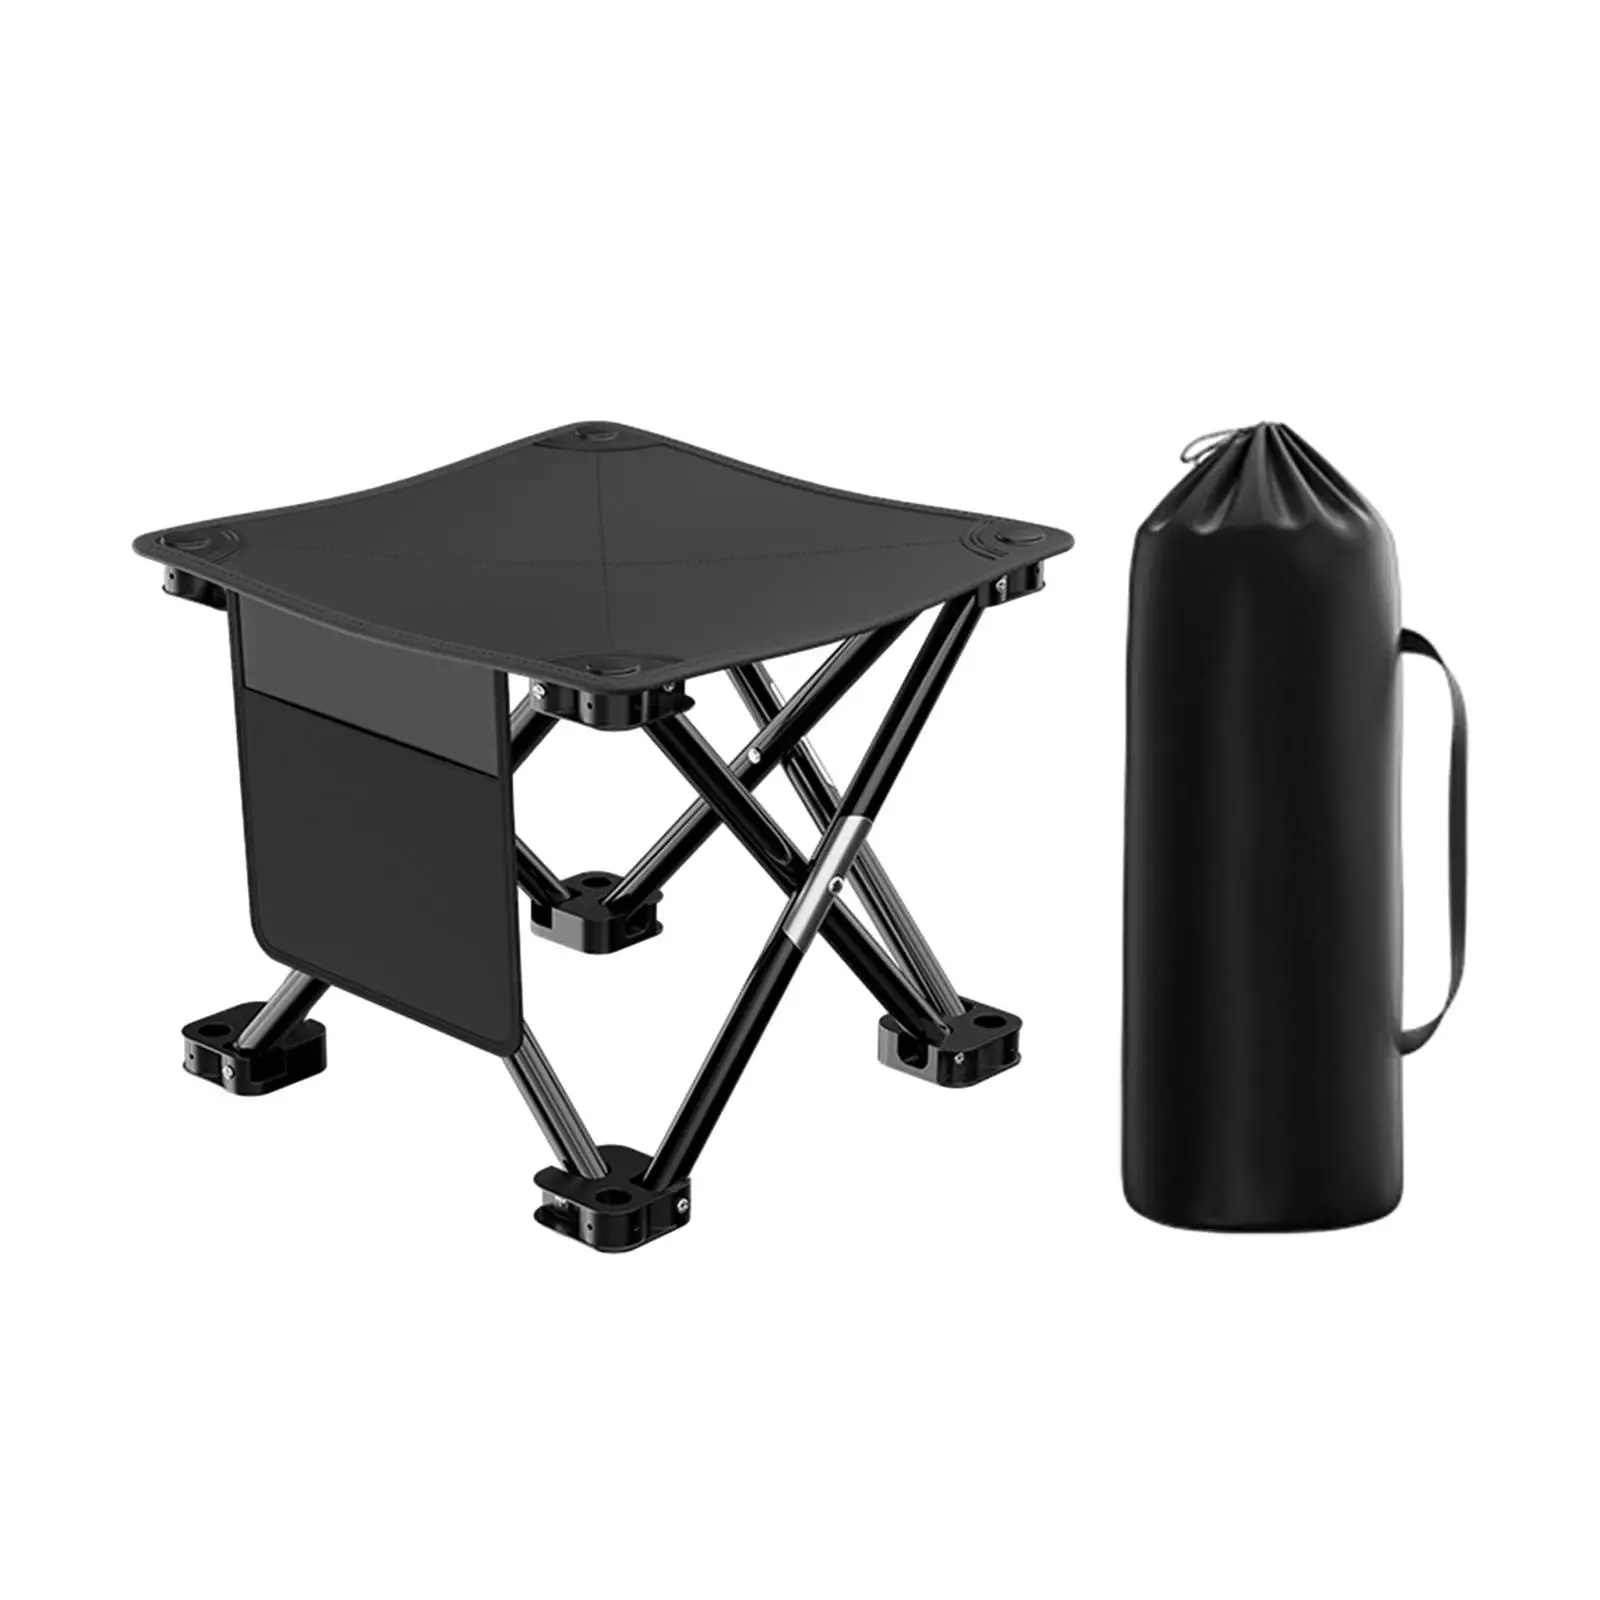 Camping Folding Stool Compact Fishing Chair Foot Rest Stable Portable Collapsible Stool for BBQ Outdoor Concert Hiking Festival